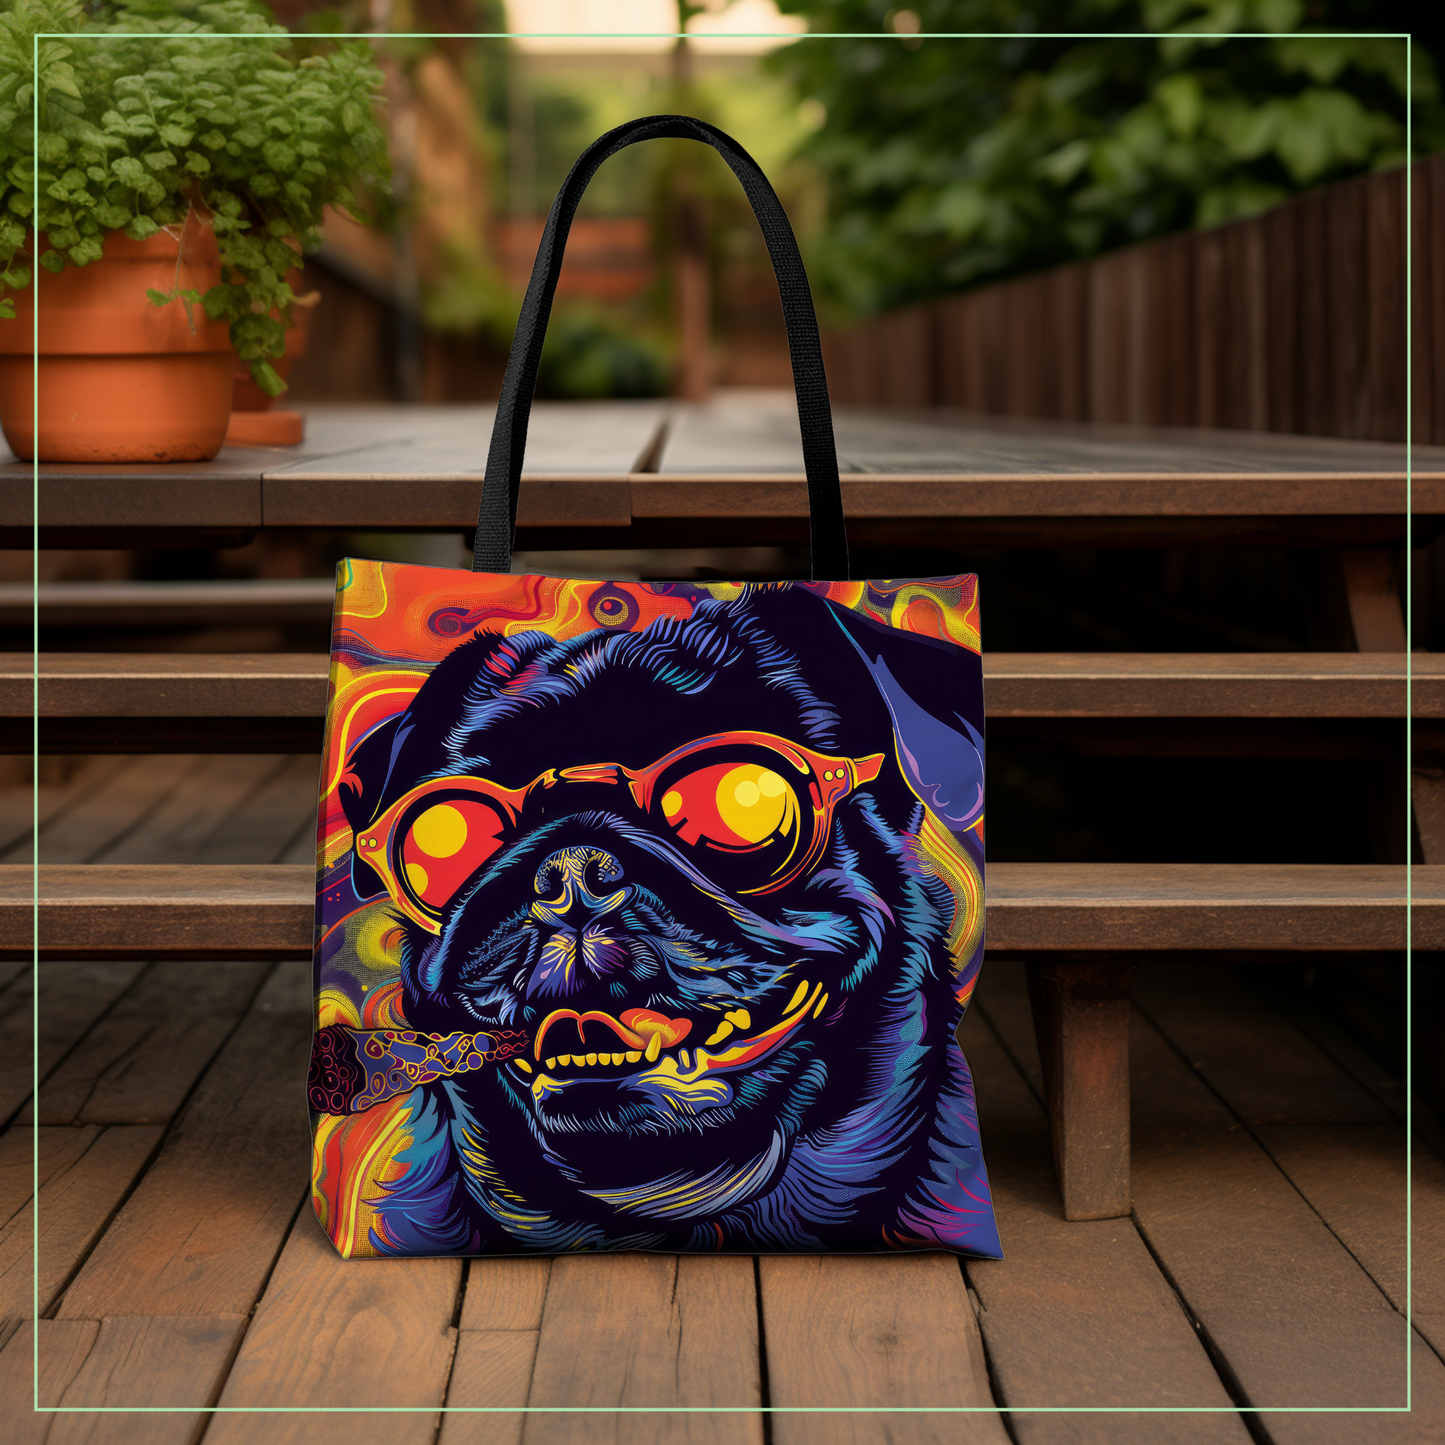 Dope - Pug Tote Bag Collection